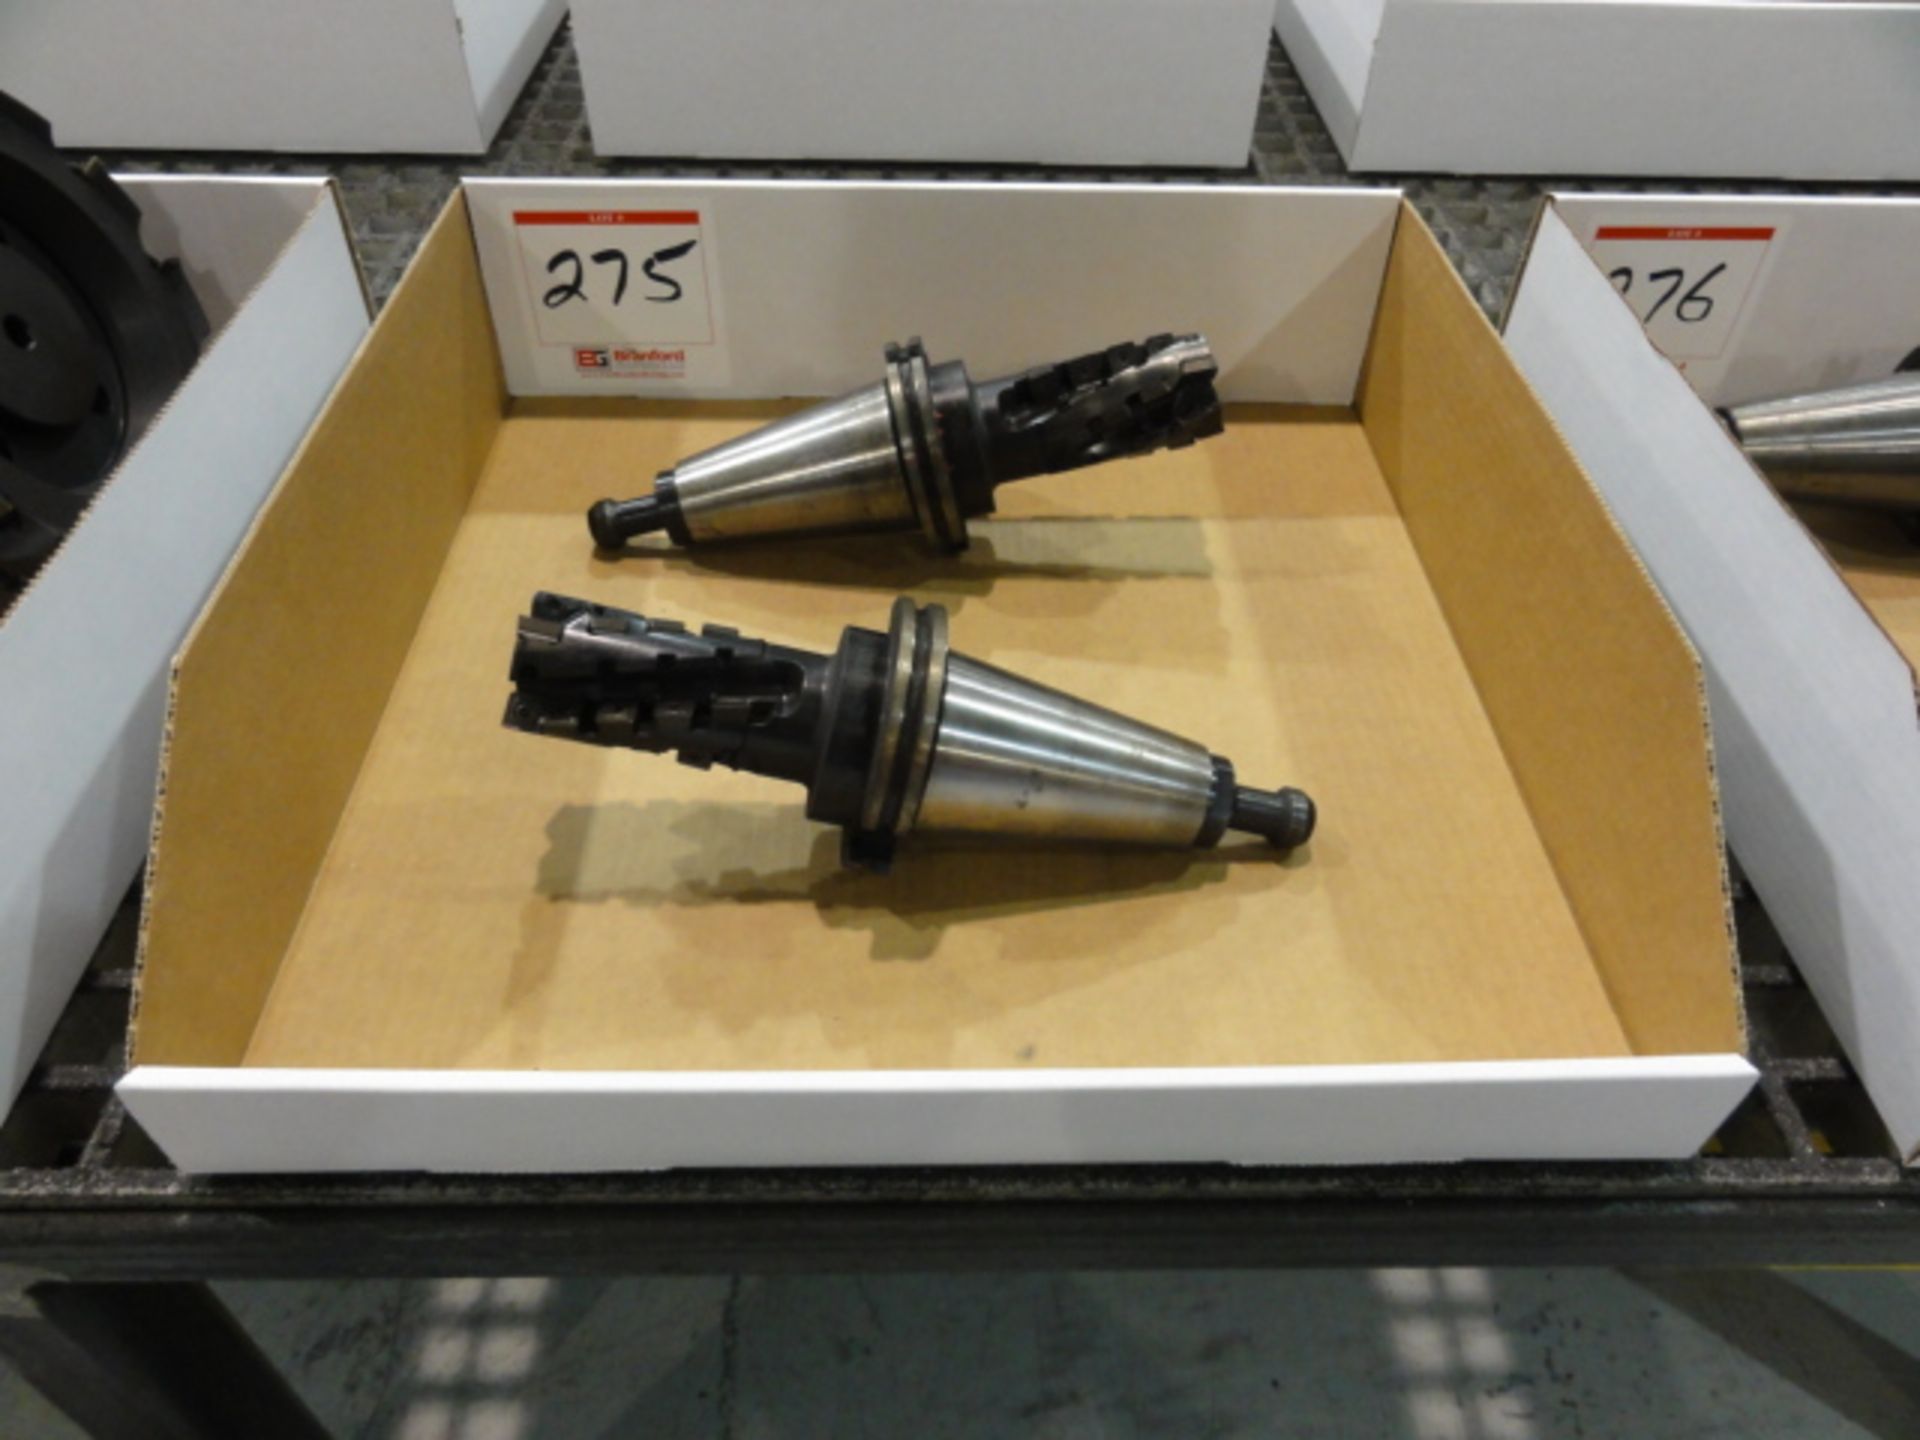 Lot of (2) CAT 50 Tool Holders w/ Carboloy 2" Model R215.59-02.00 Carbide Insert Finishing Tools